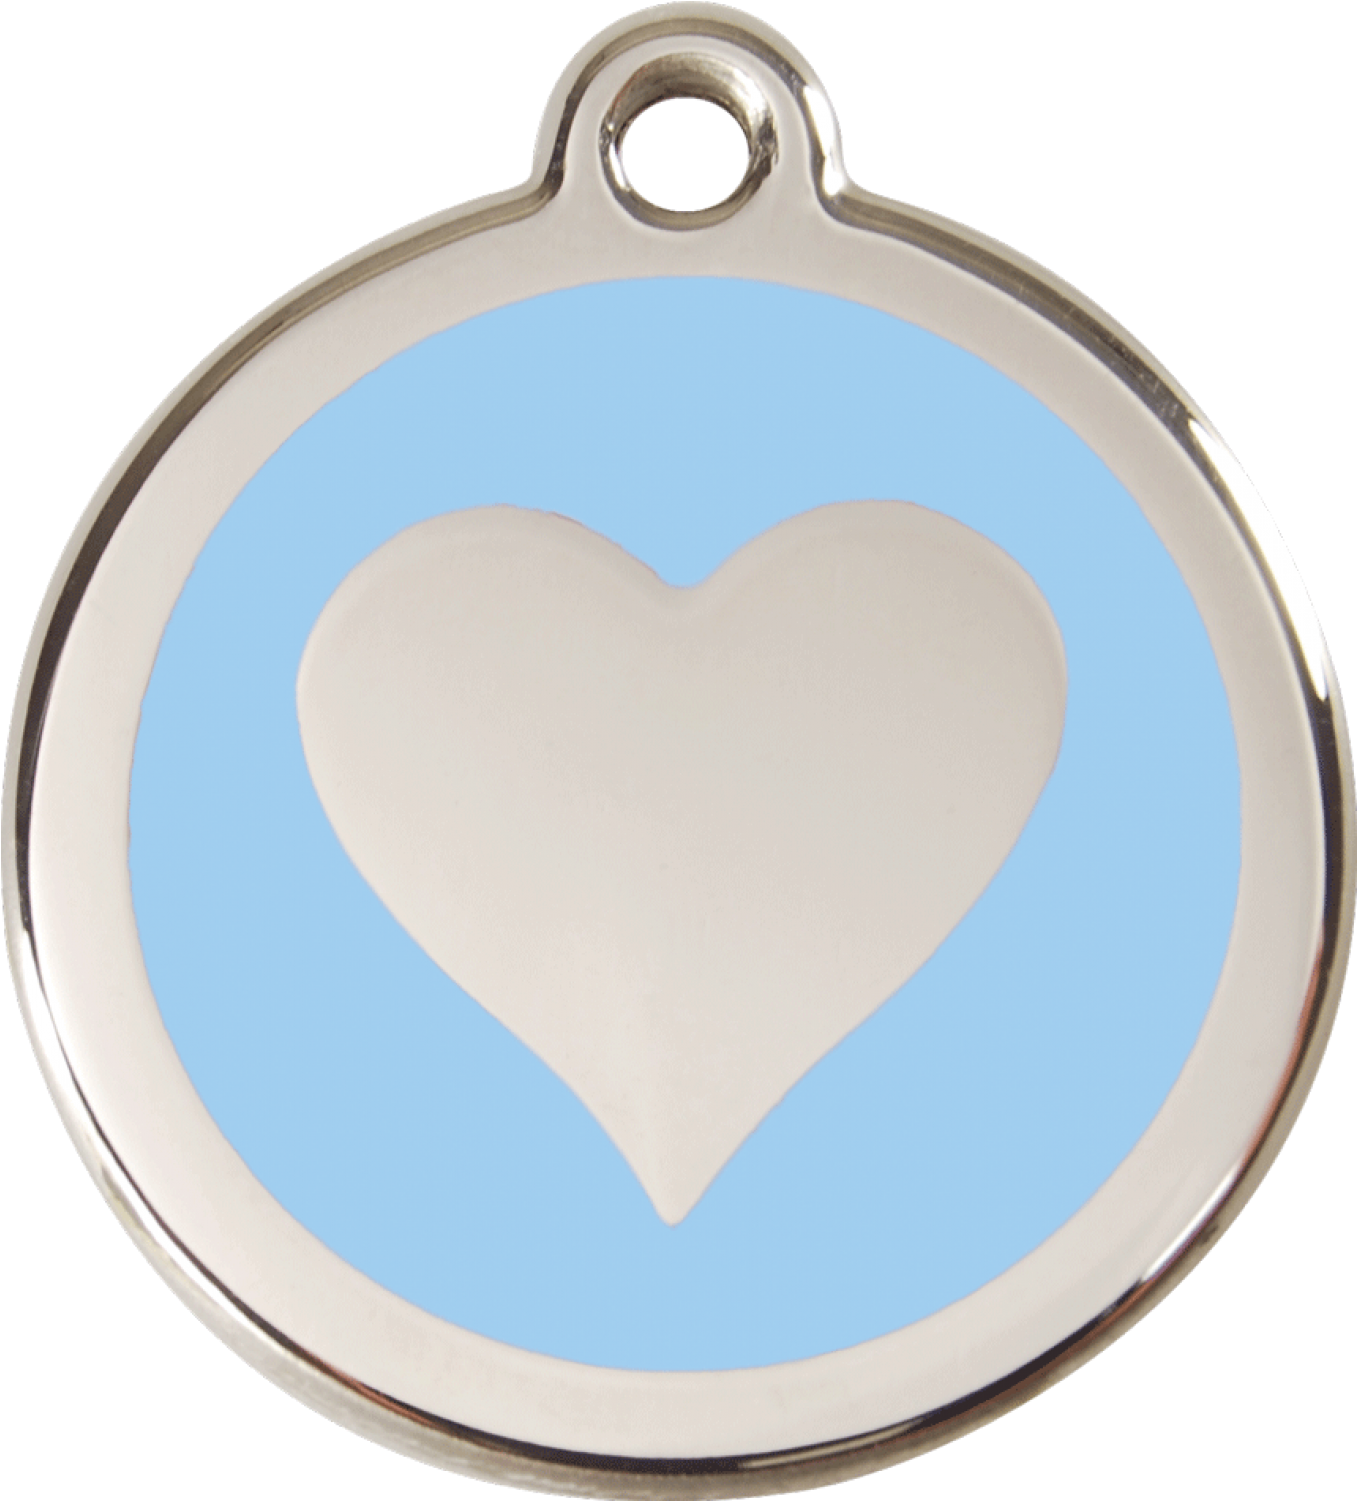 Red Dingo Stainless Steel Enameled Engraved Id Tag - Red Dingo Heart Enamel Dog Tag Light Blue - Large (1500x1500)